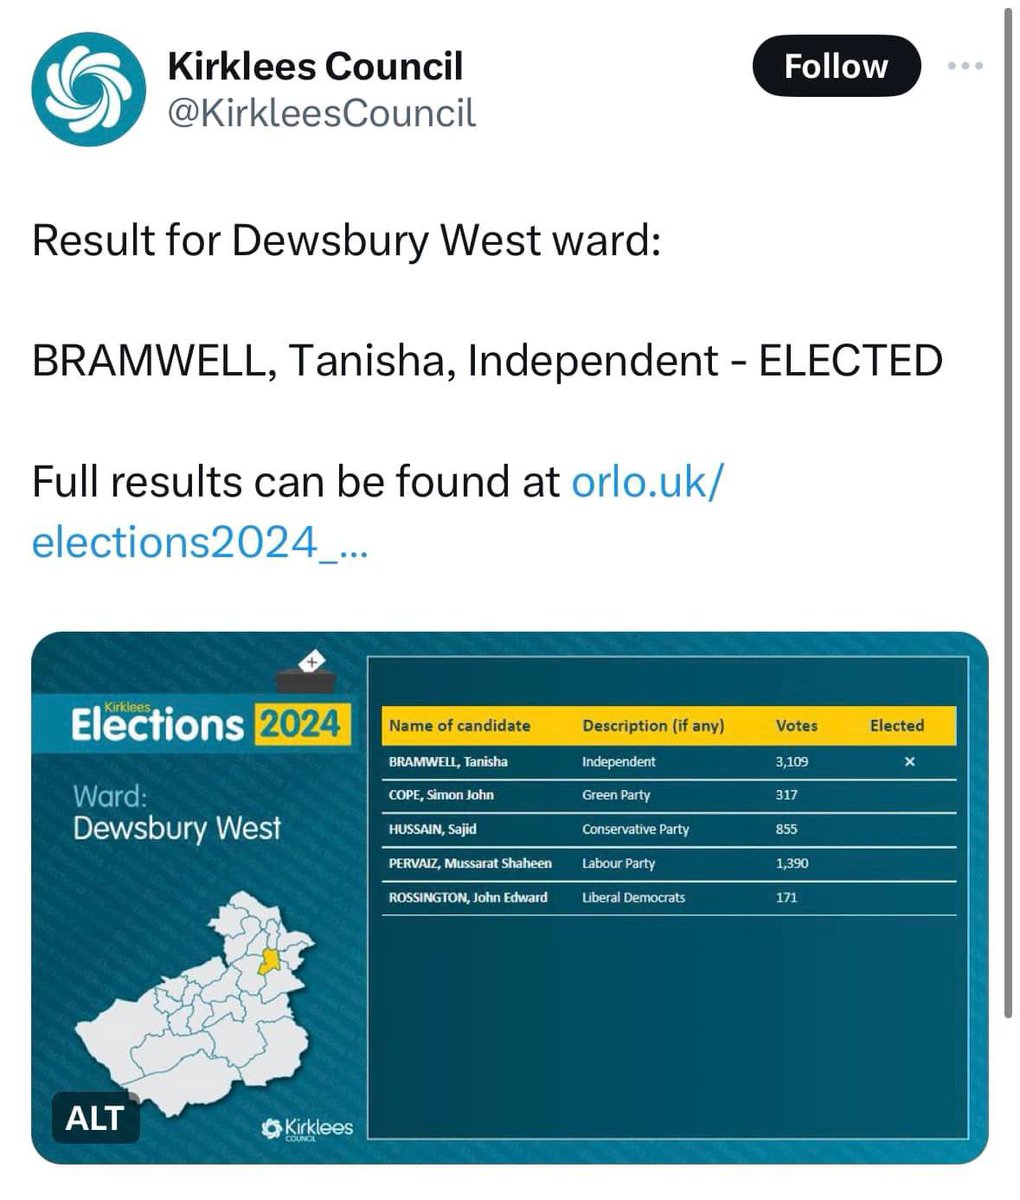 Very proud to announce WE HAVE WON I AM NOW YOUR ELECTED INDEPENDENT COUNCILLOR IN DEWSBURY WEST WE HAVE MADE HISTORY!